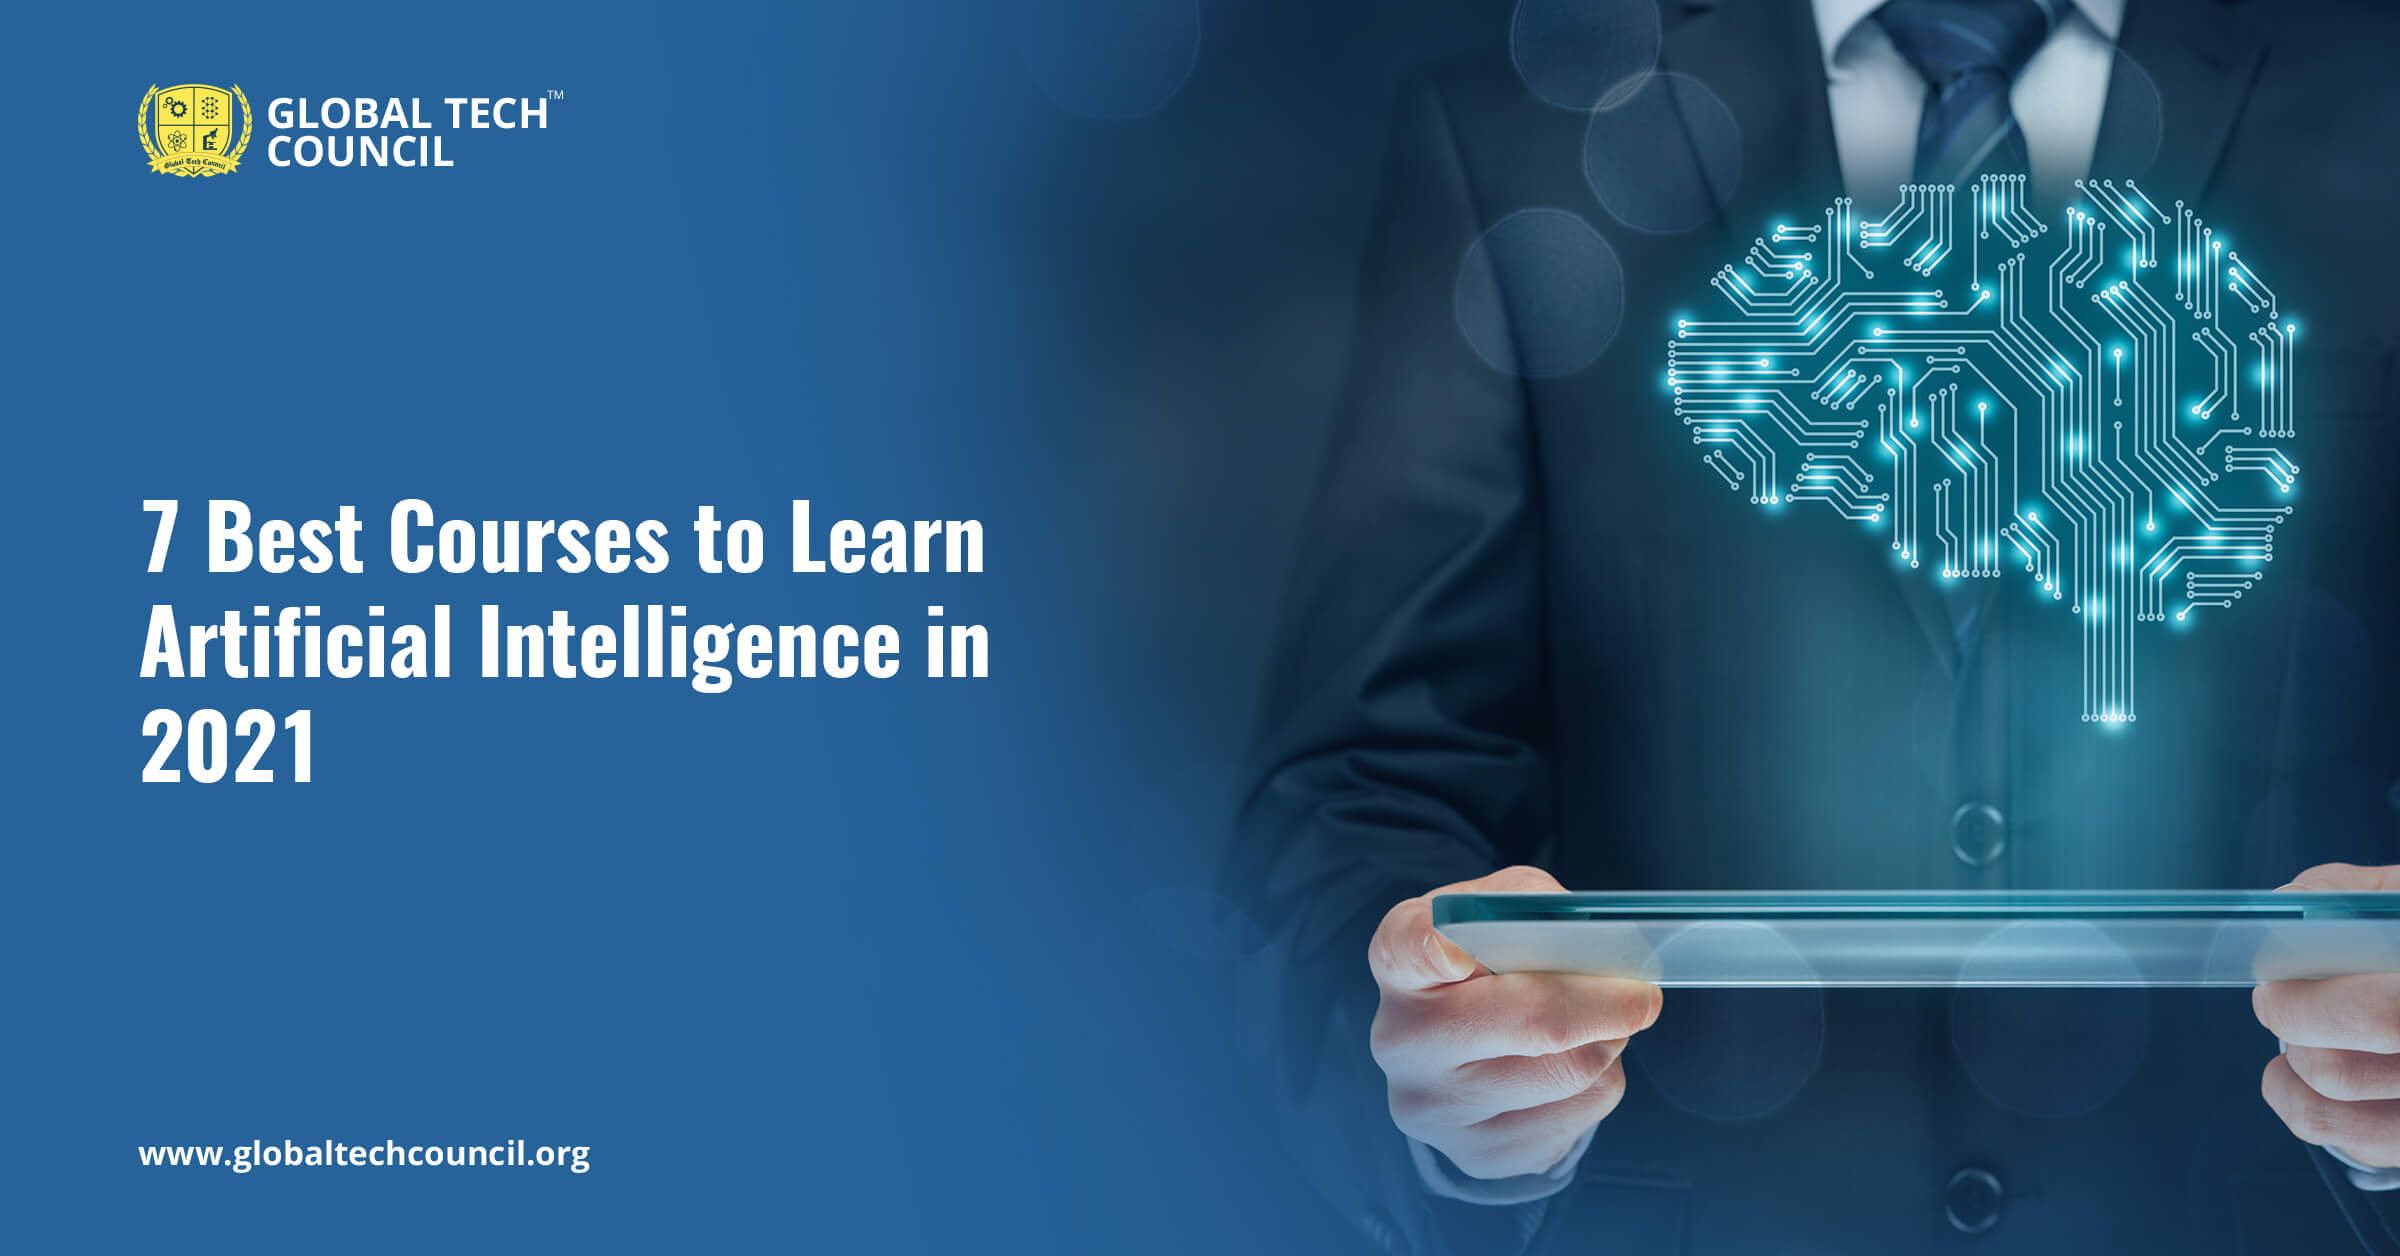 7 Best Courses to Learn Artificial Intelligence in 2021